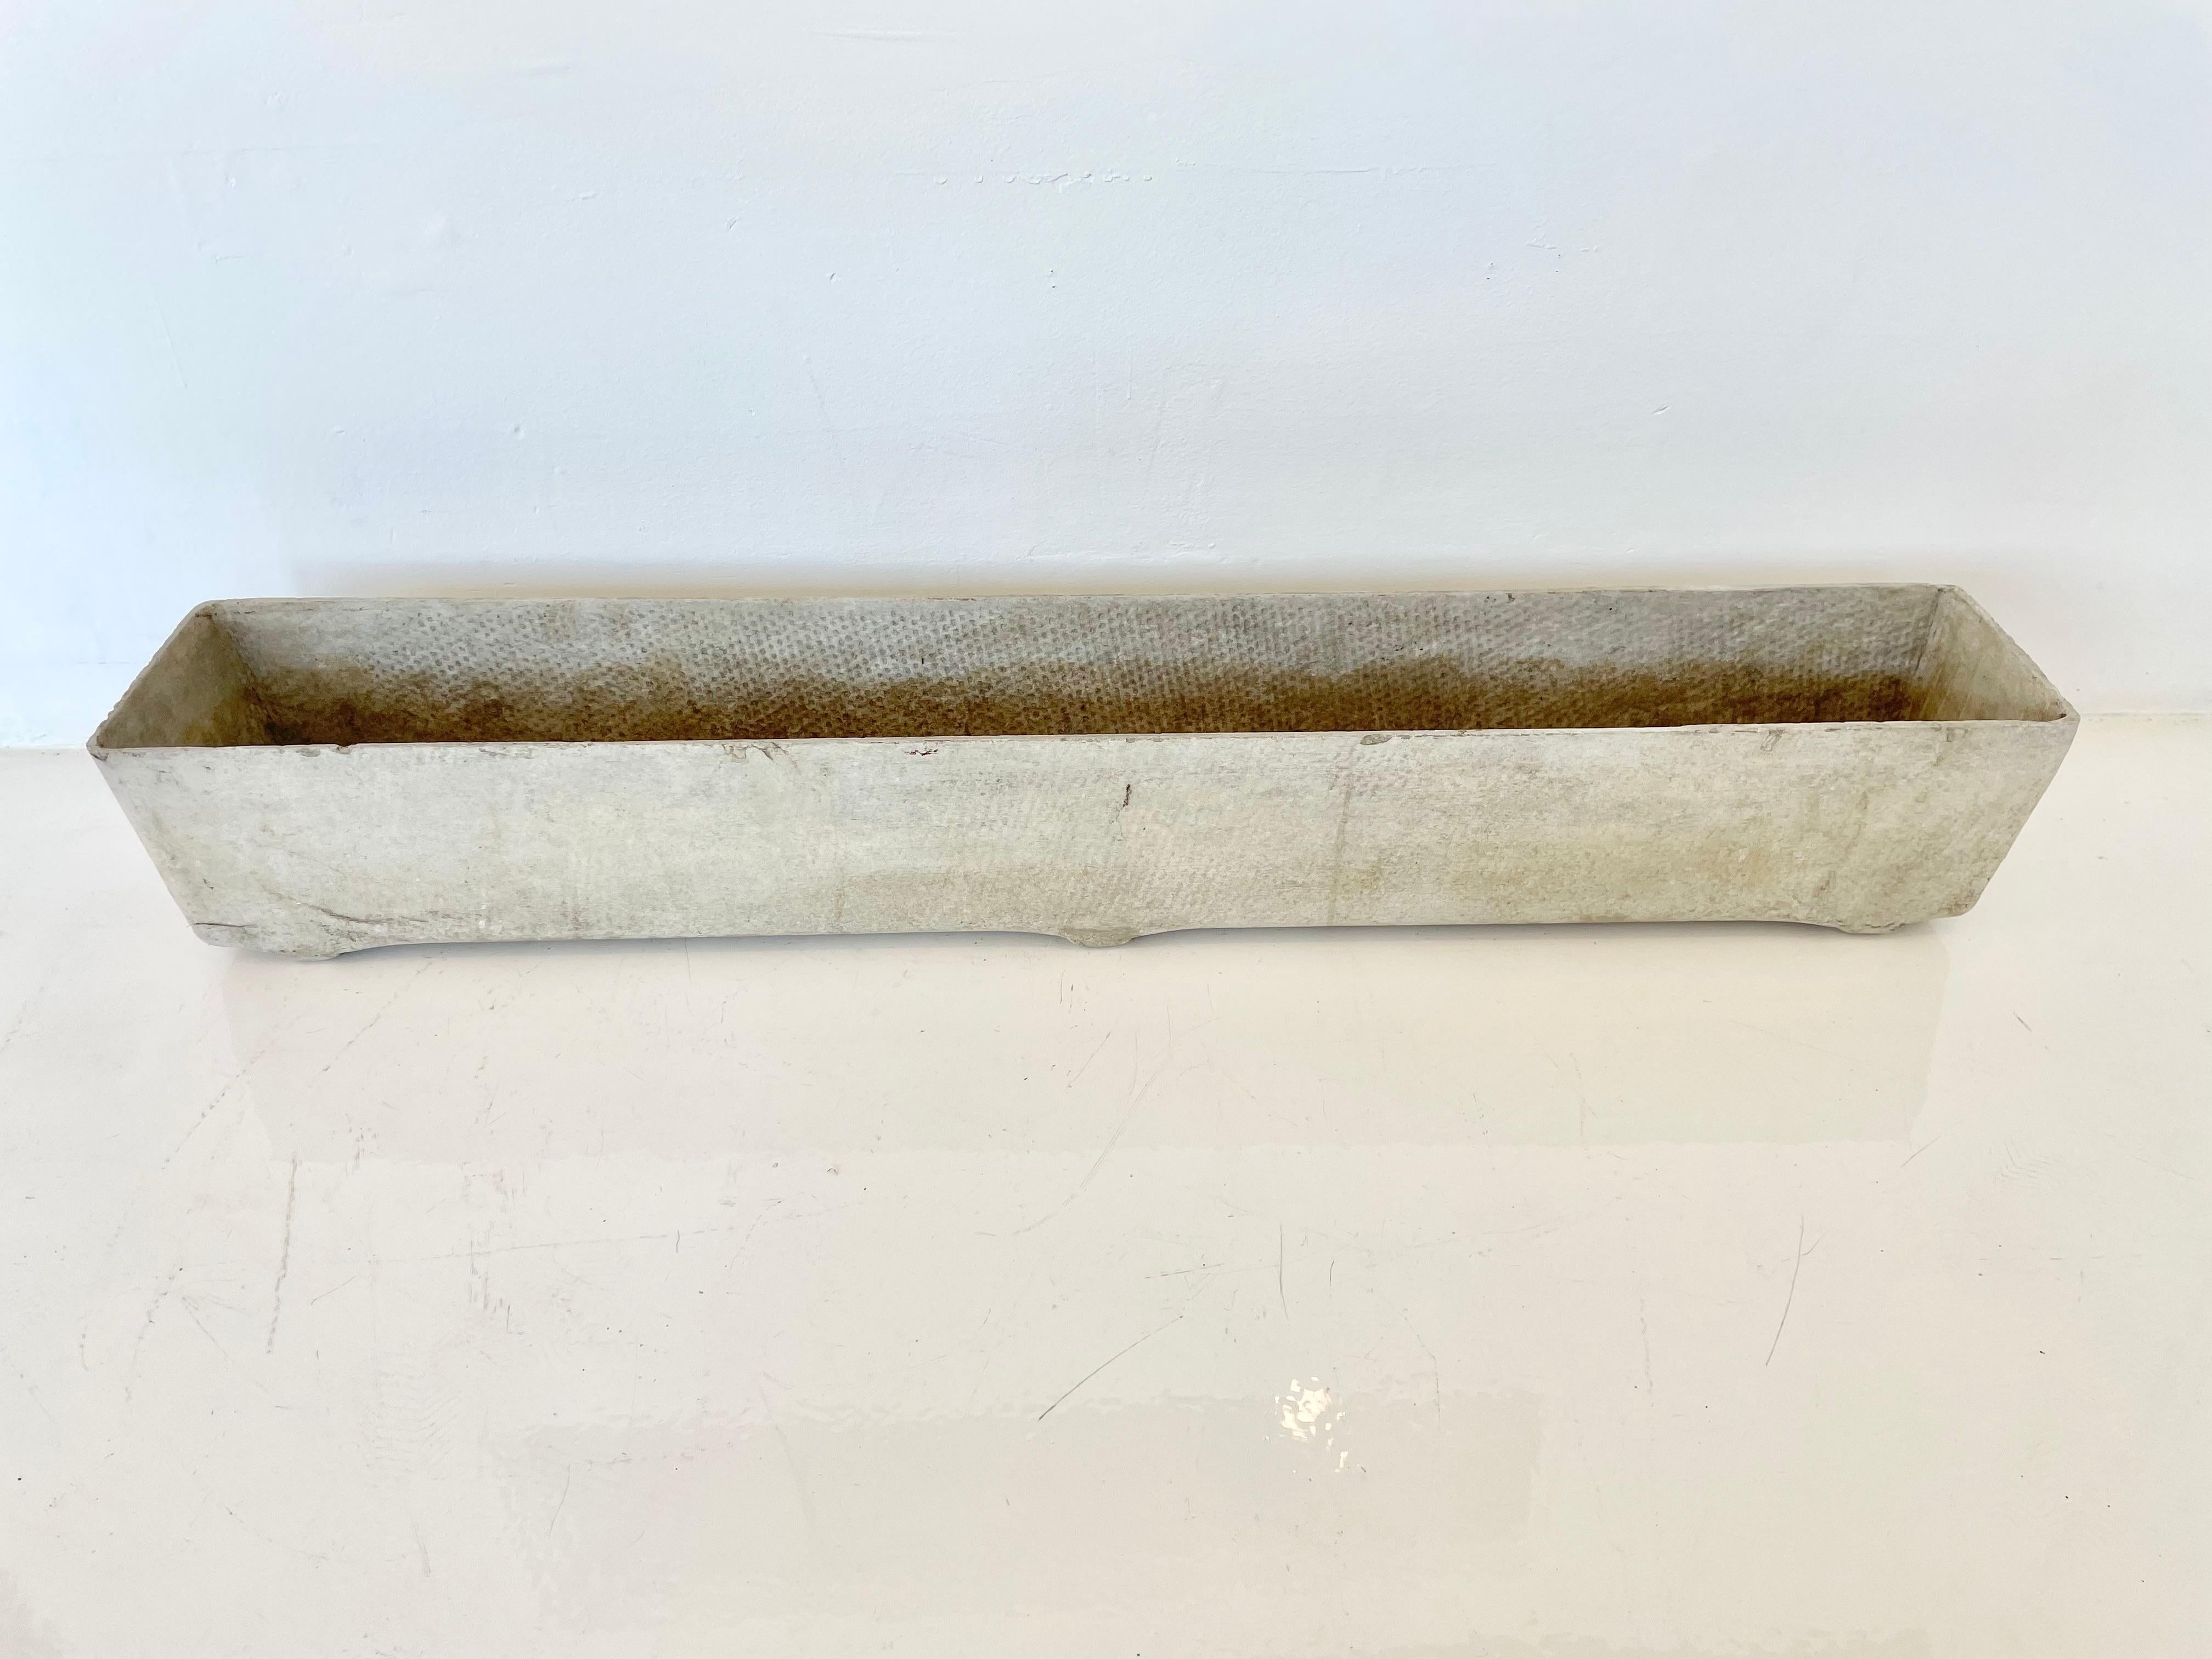 Concrete trough planter by Swiss architect Willy Guhl. Just under four feet long. Factory drilled drainage holes. Perfect depth for narrow spaces. Small rounded feet on underside of planter. Great condition. Measure: 47